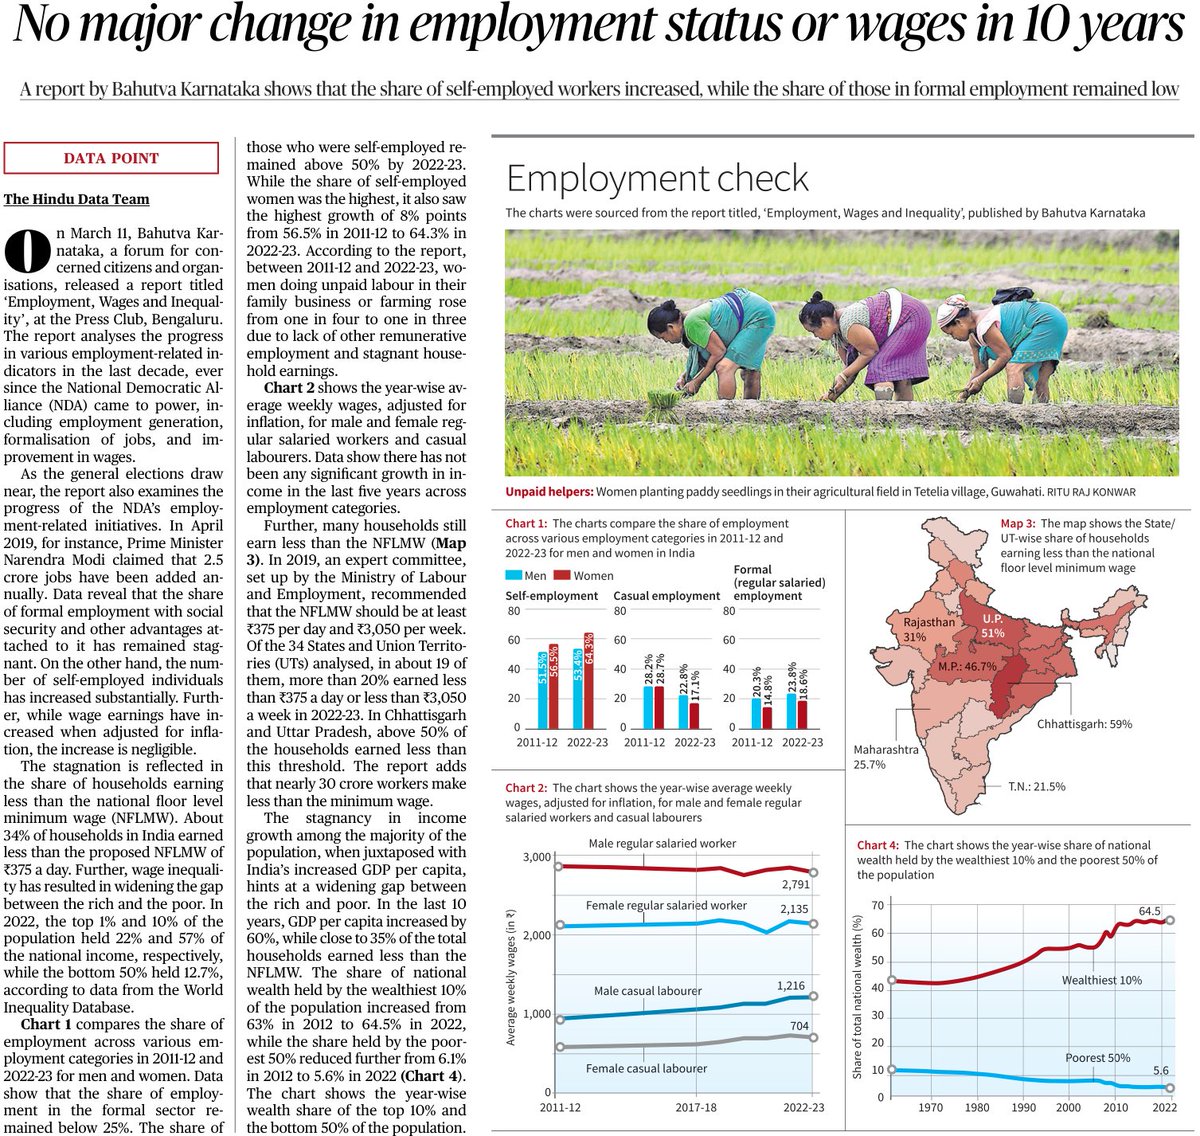 In today's @the_hindu showing the wage stagnation crisis & rising inequality in the last 10 years. Full report by @BahutvaKtka tinyurl.com/daayvkx5 Choose wisely on what kind of India we want? Equal or unequal?